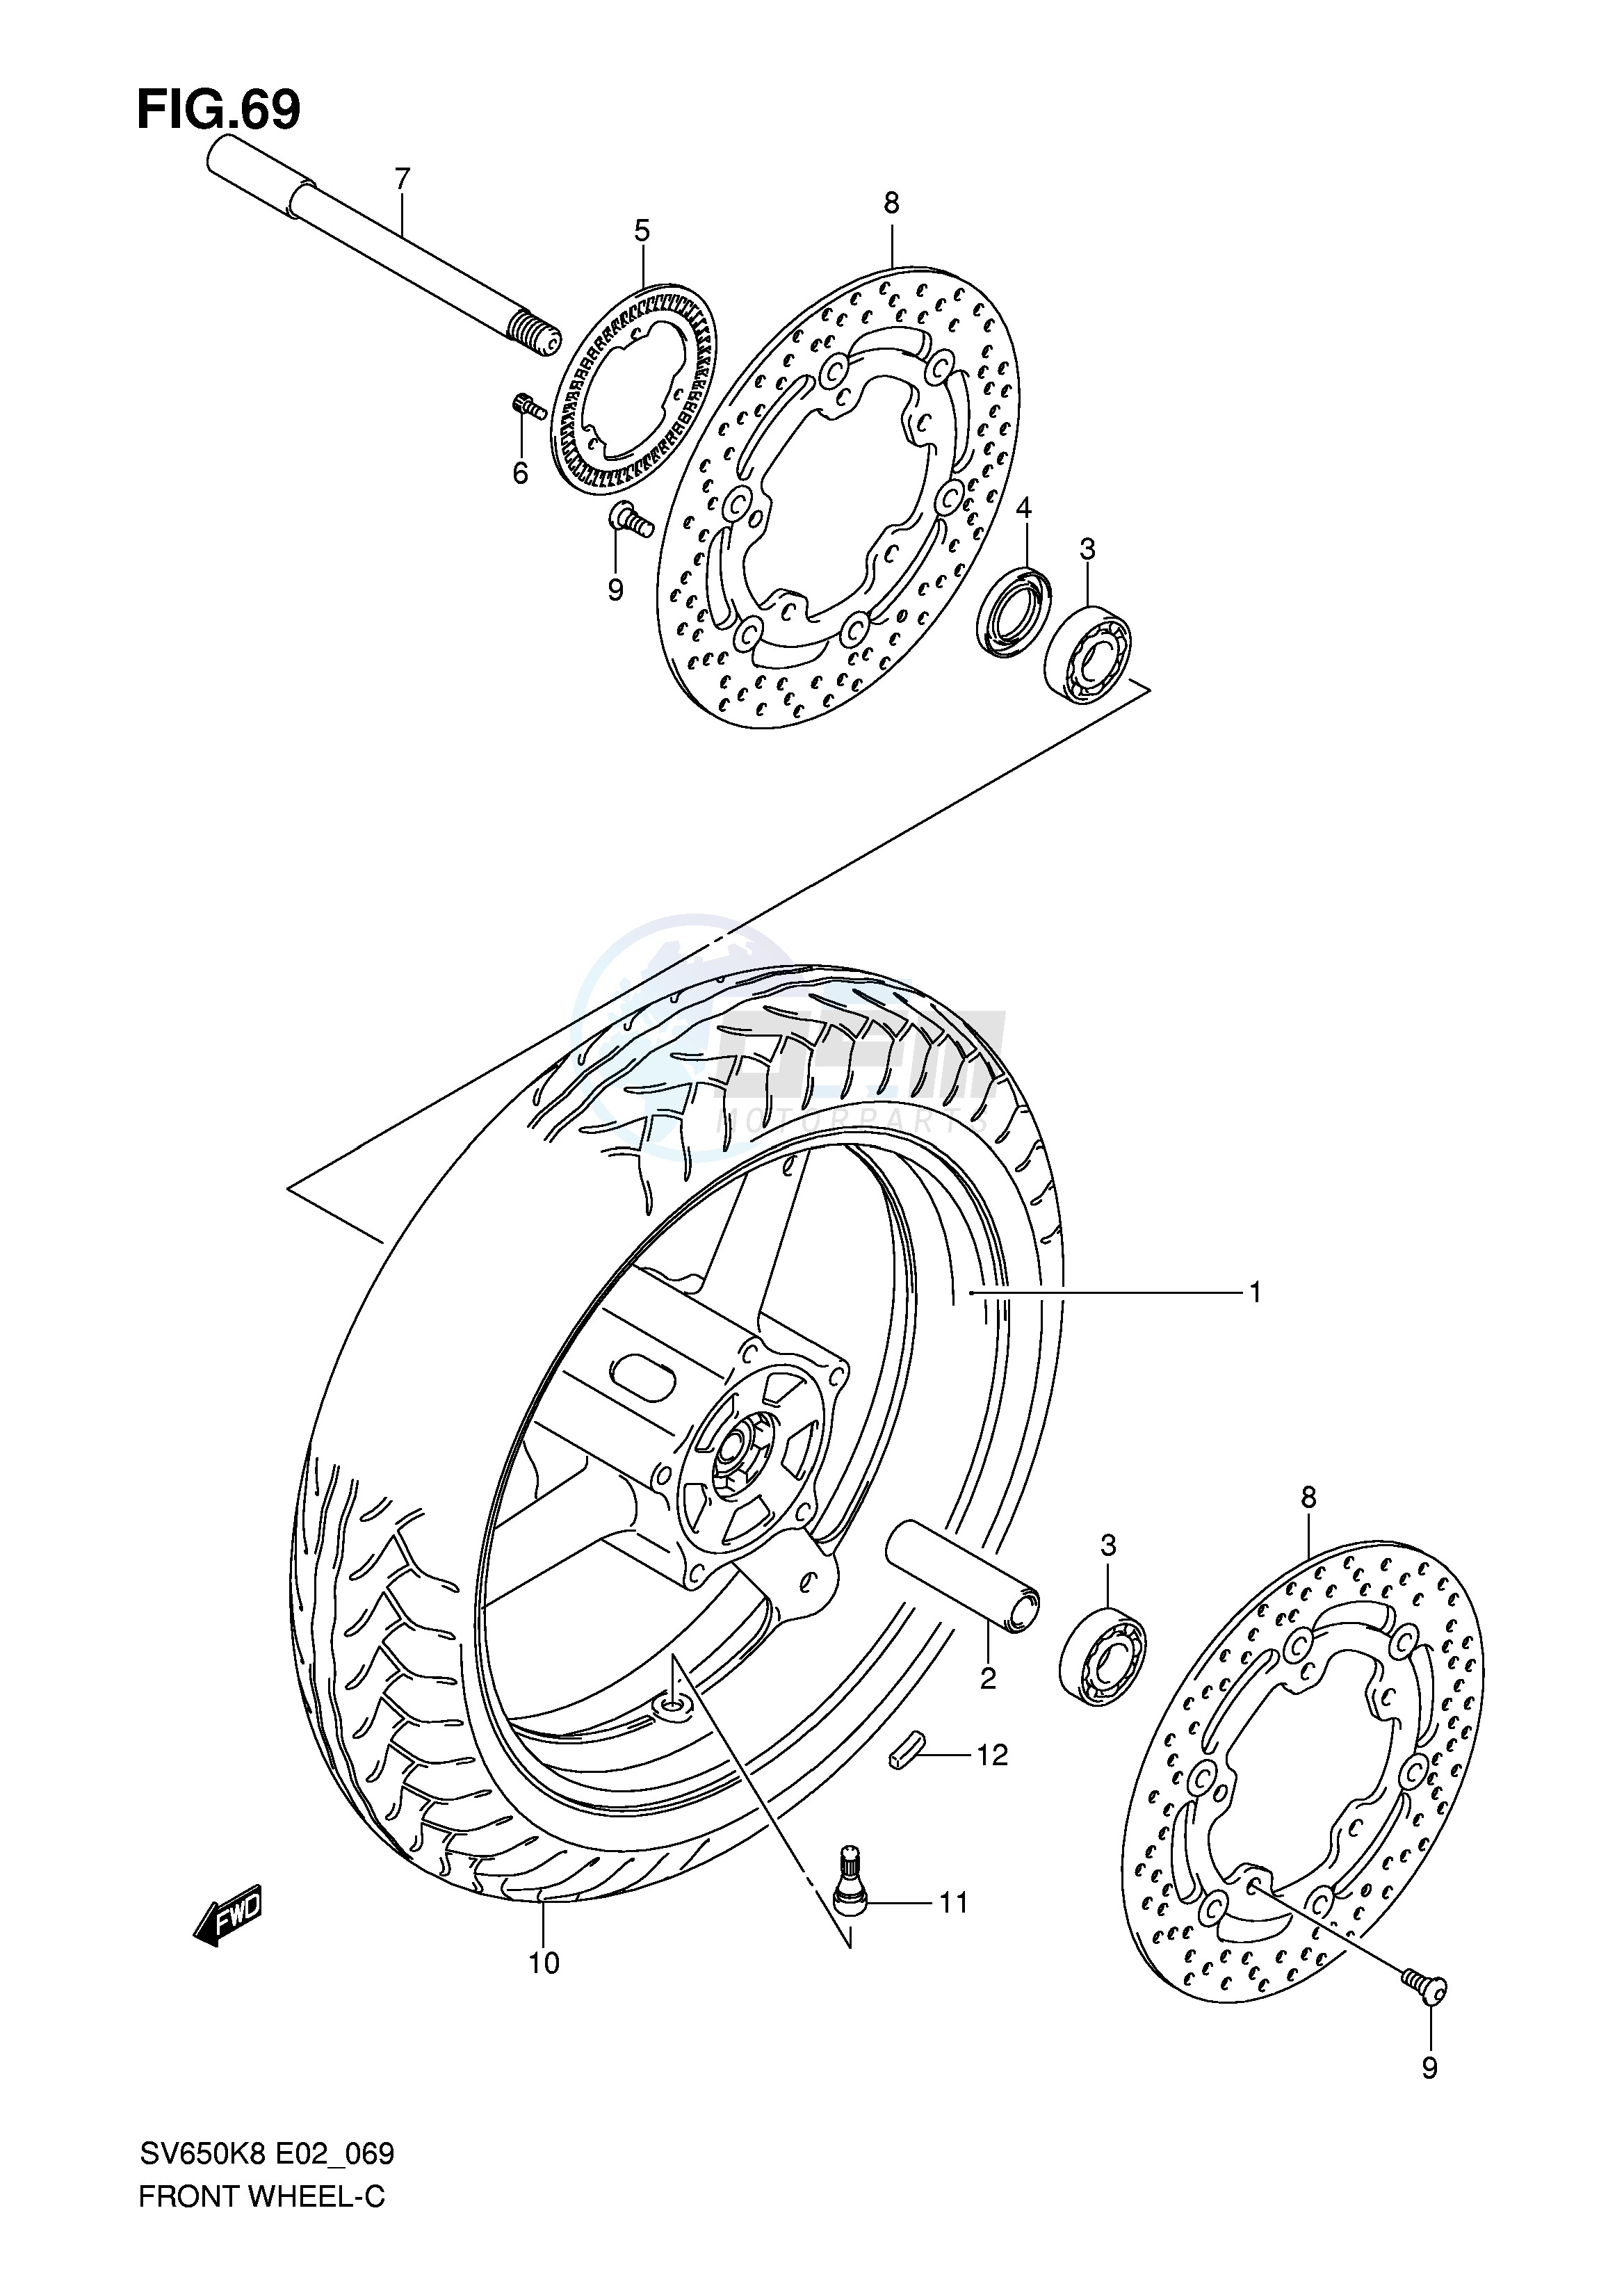 FRONT WHEEL (SEE NOTE) blueprint